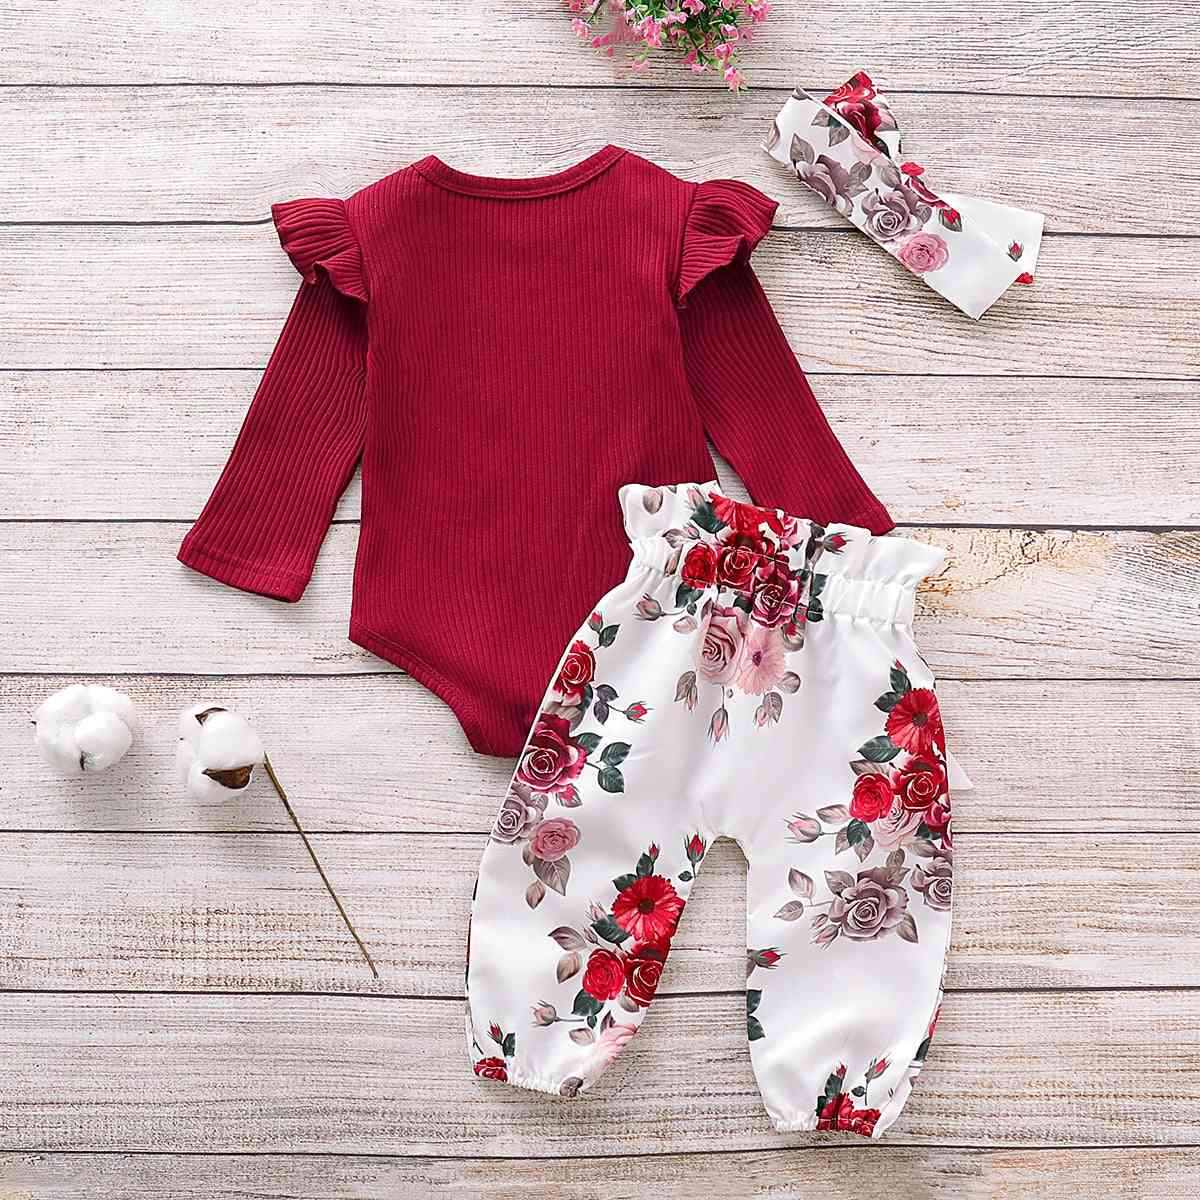 Newborn Baby Girl Clothes Knitting Cotton Long Sleeve Romper Tops Flower Print Pants Headband Outfits